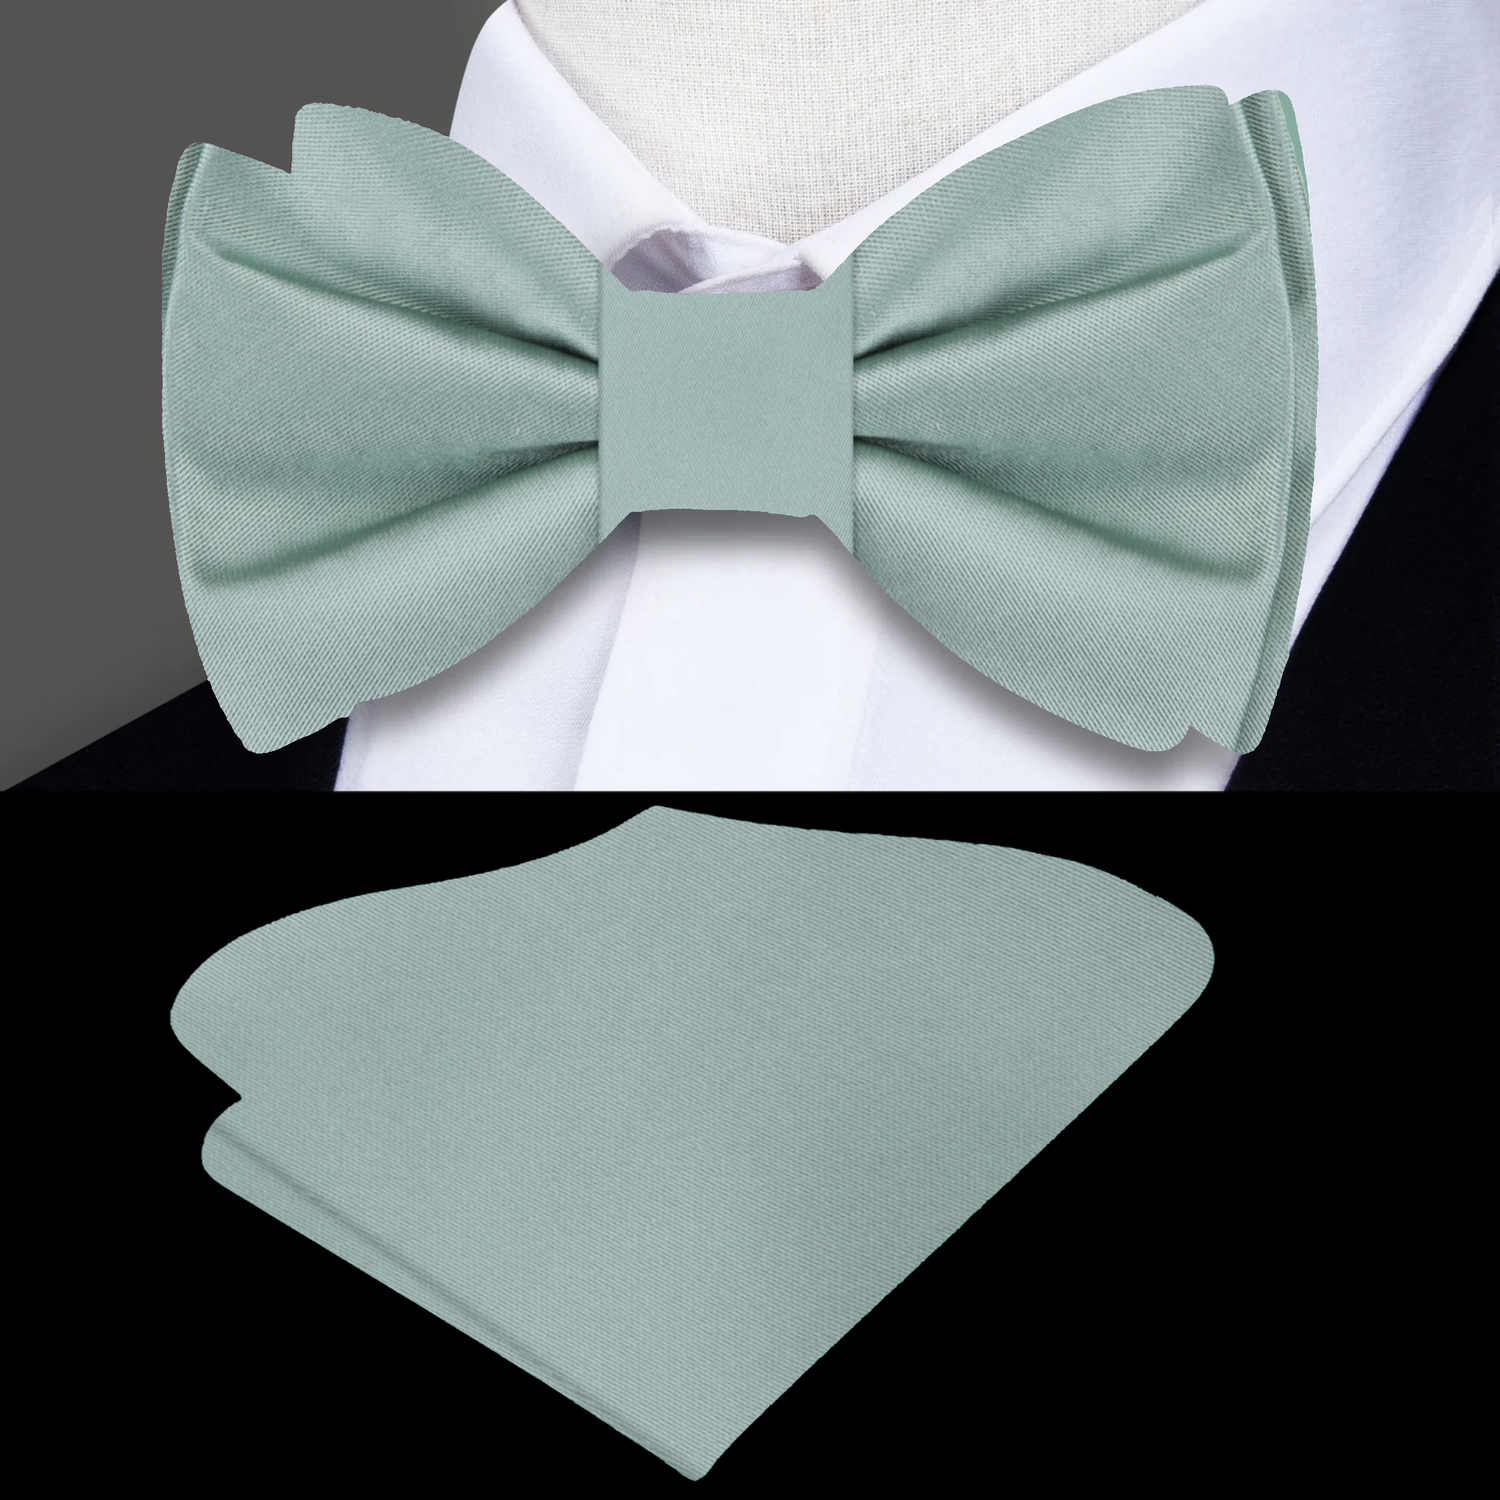 Main View; Stone Pistachio Green Bow Tie and Pocket Square